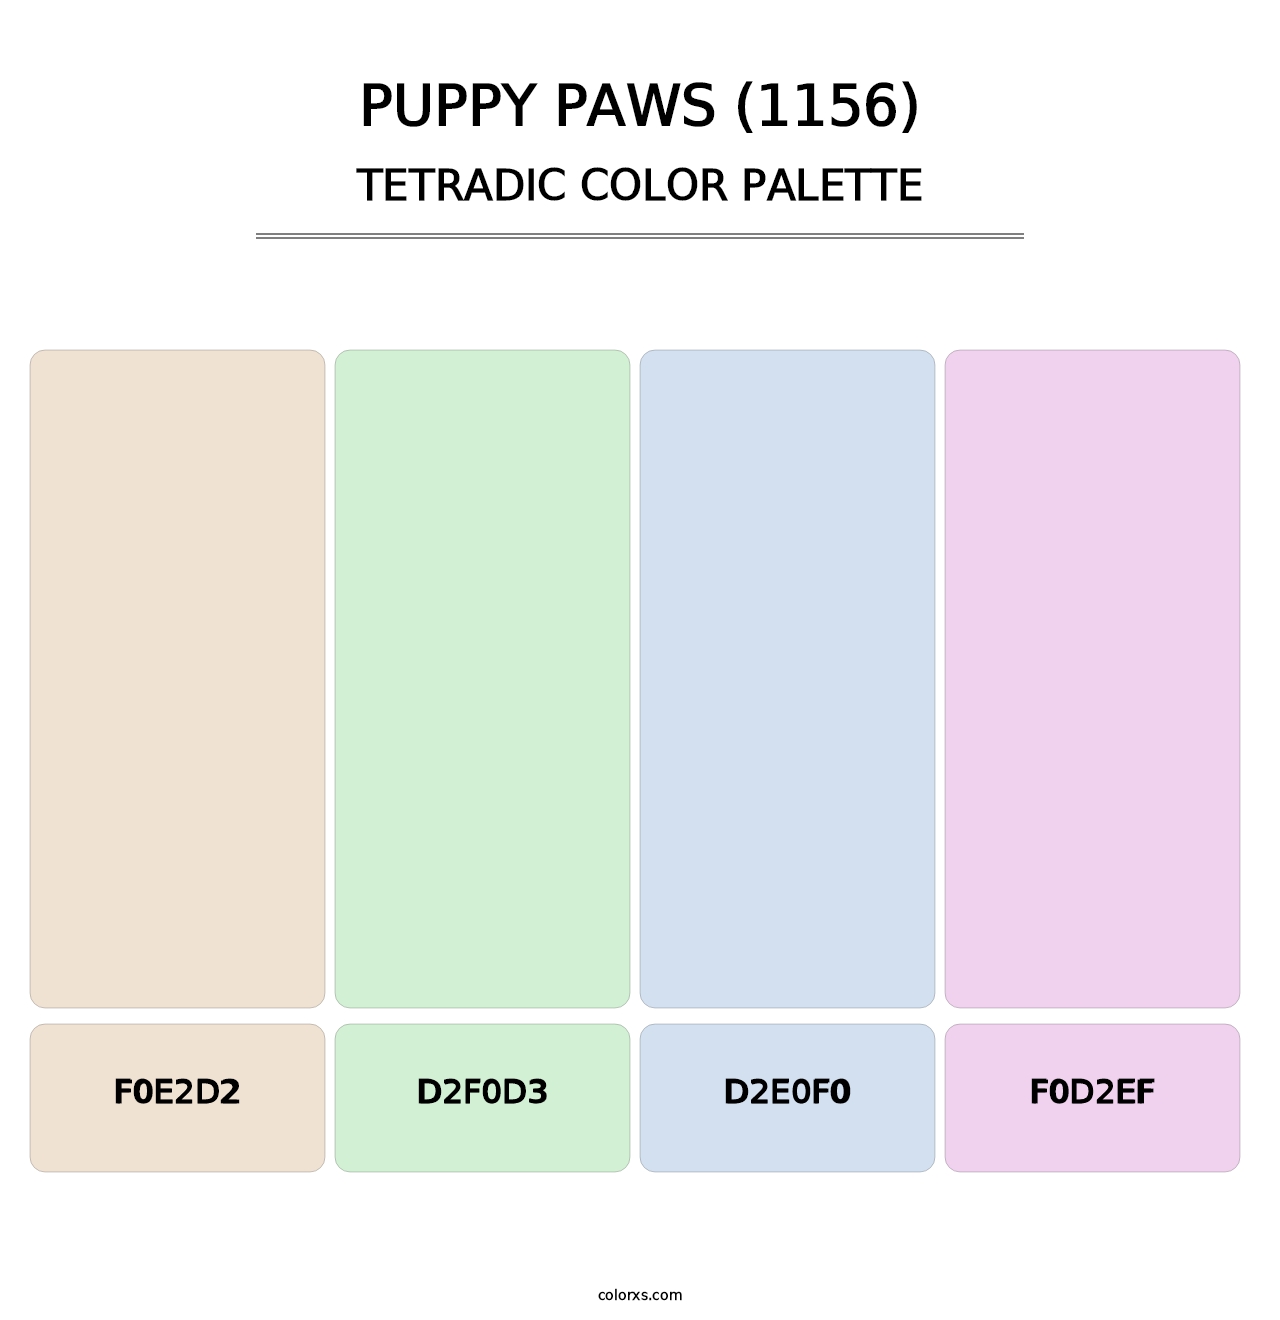 Puppy Paws (1156) - Tetradic Color Palette